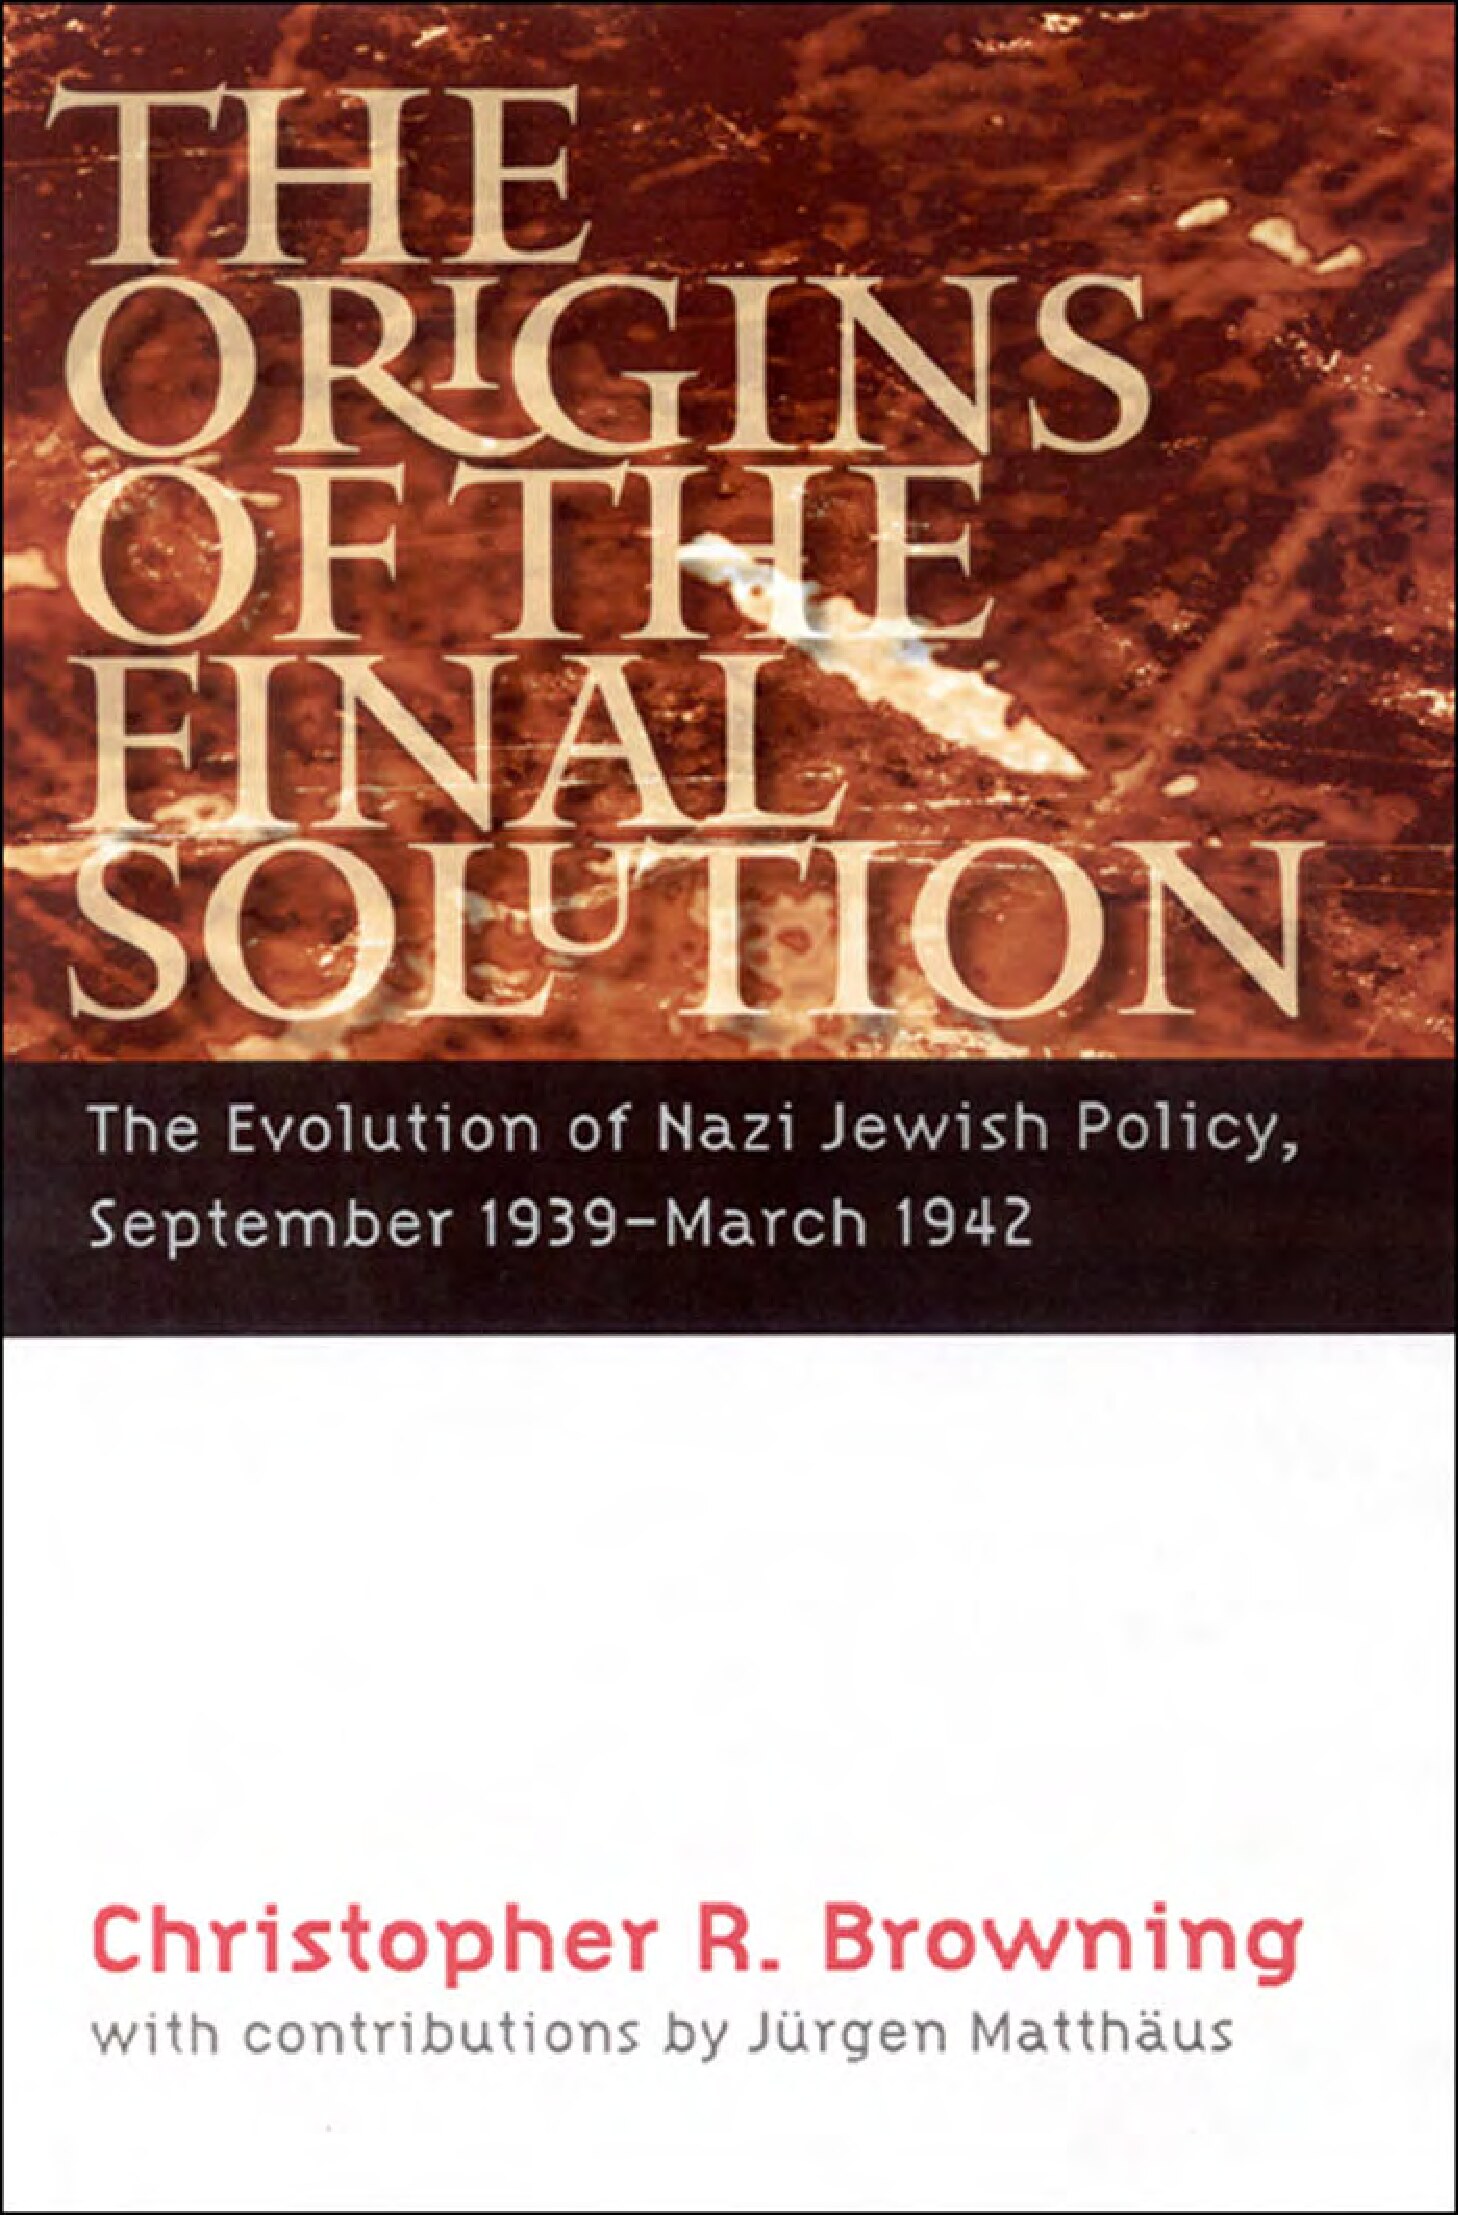 Browning, Christopher R.; The Origins Of The Final Solution - The Evolution Of Nazi Jewish Policy - September 1939-March 1942